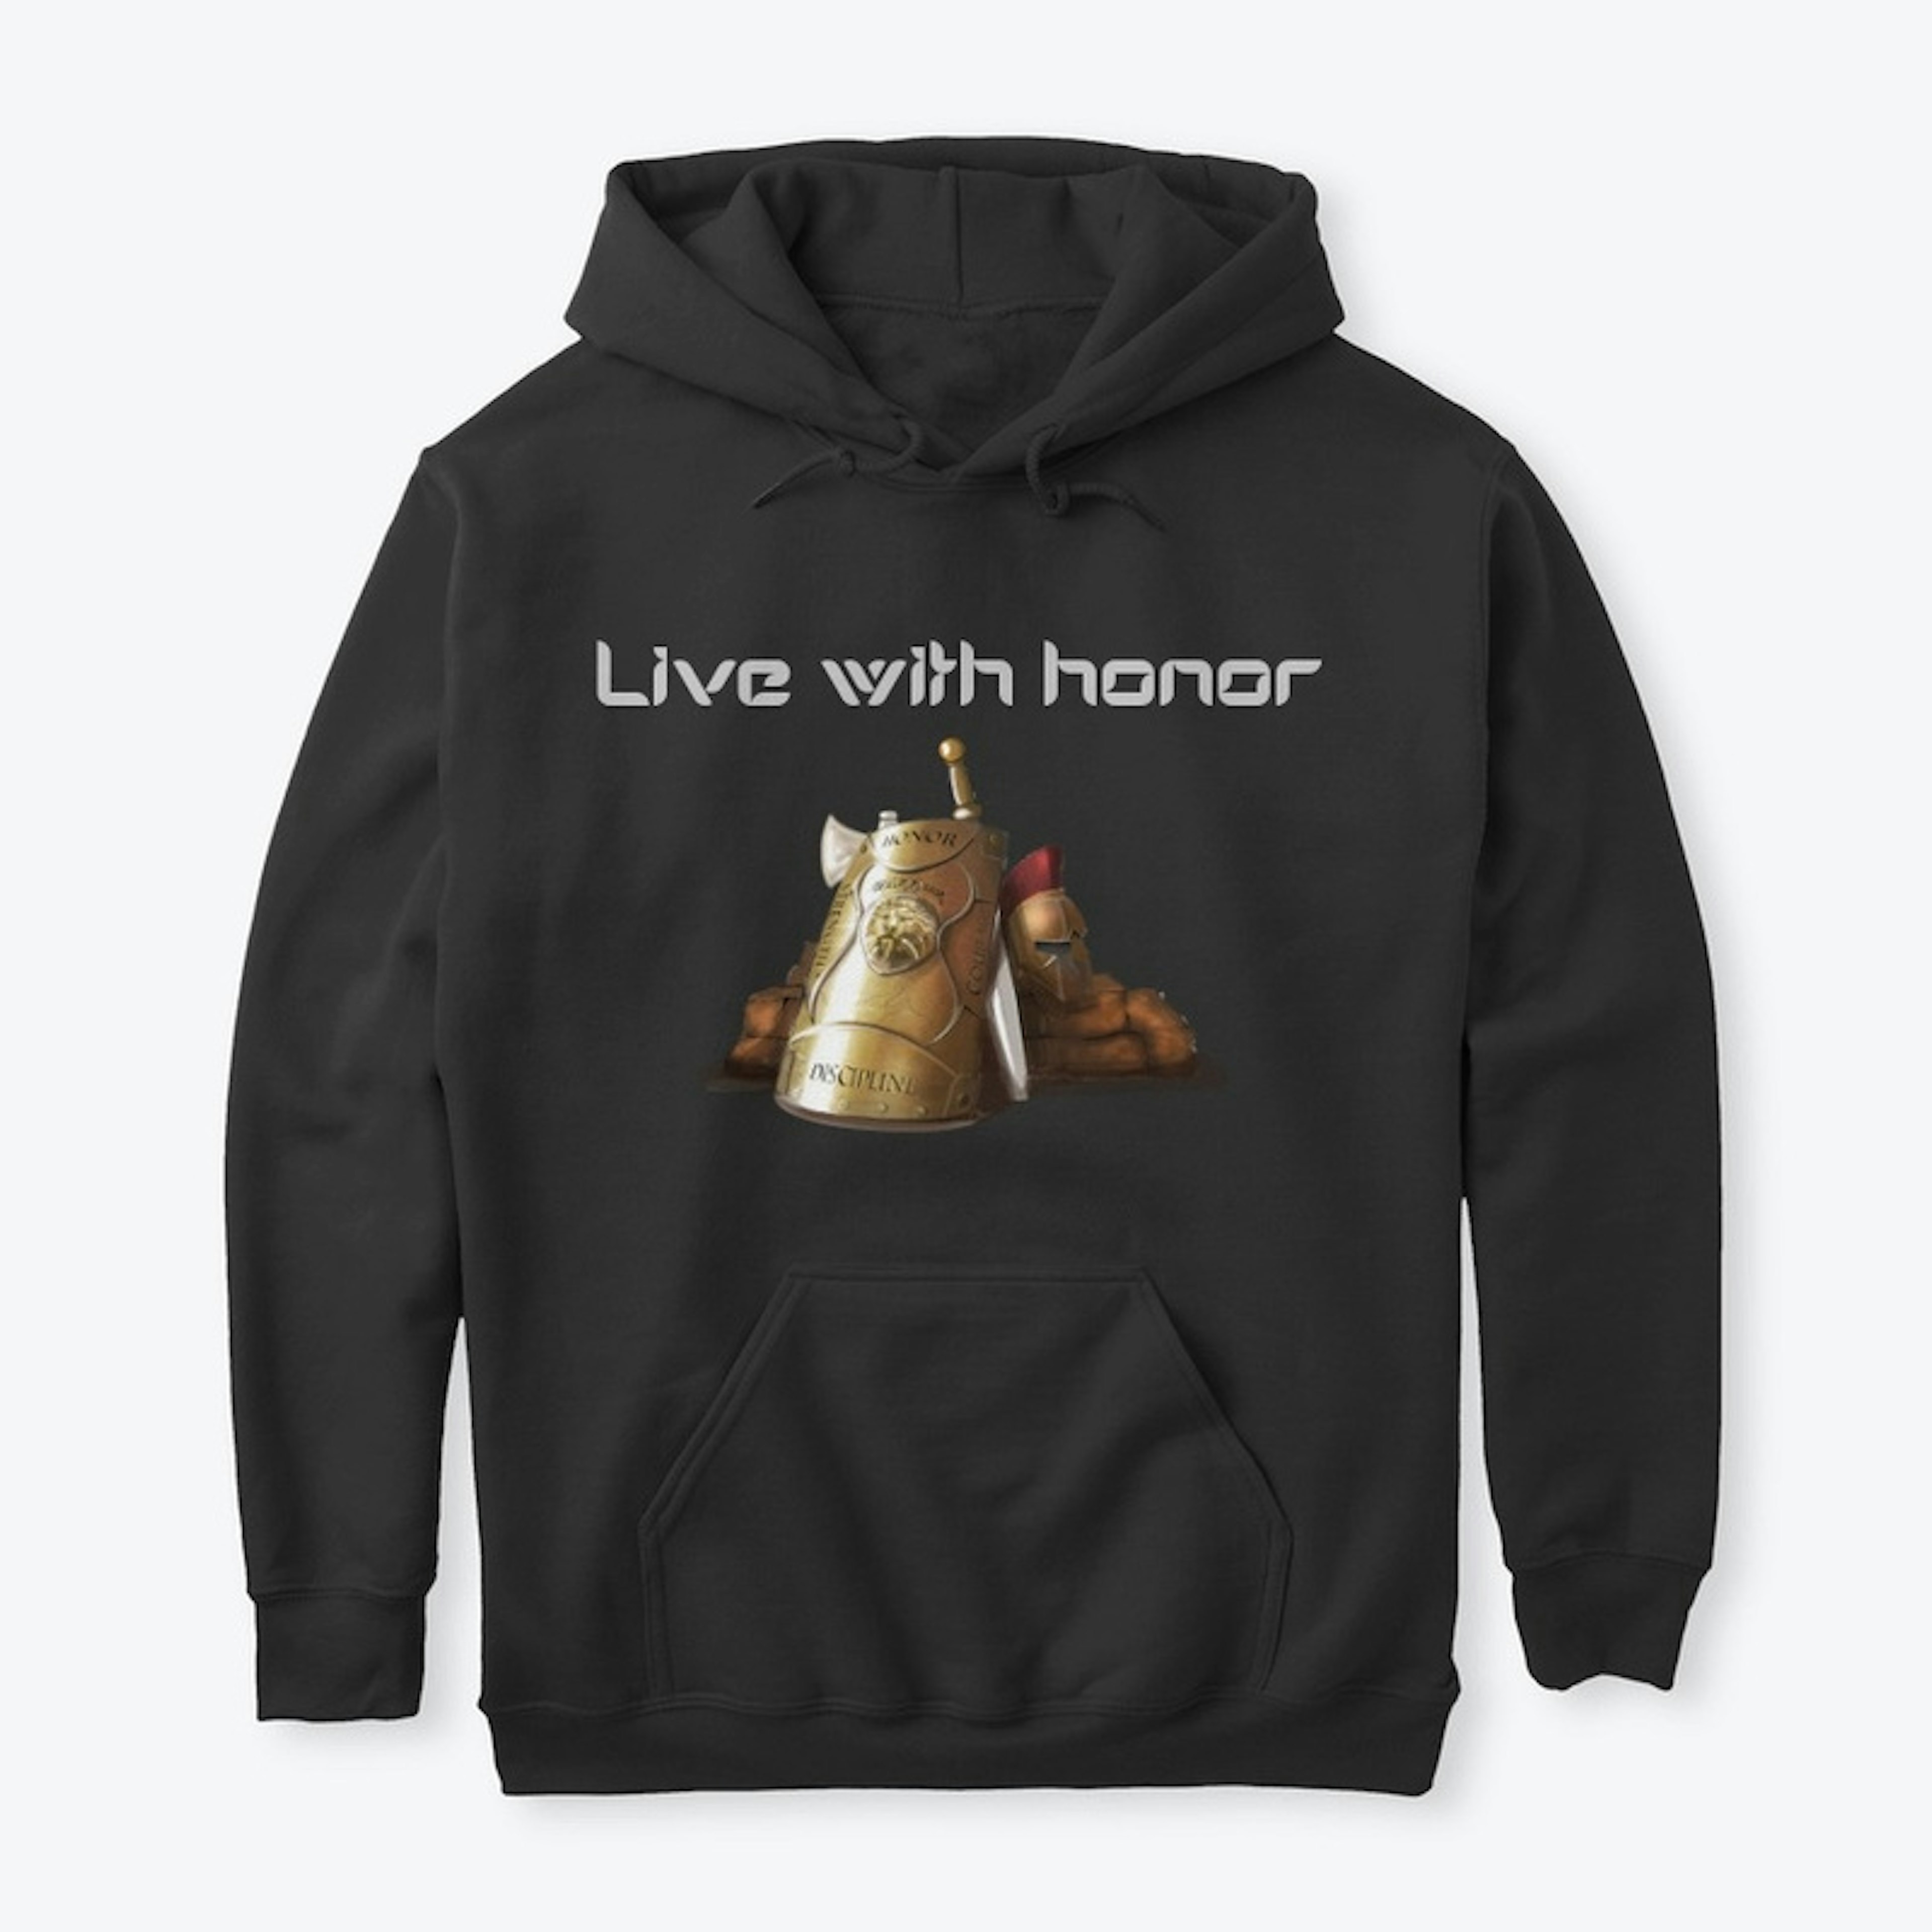 Live with honor (white lettering)